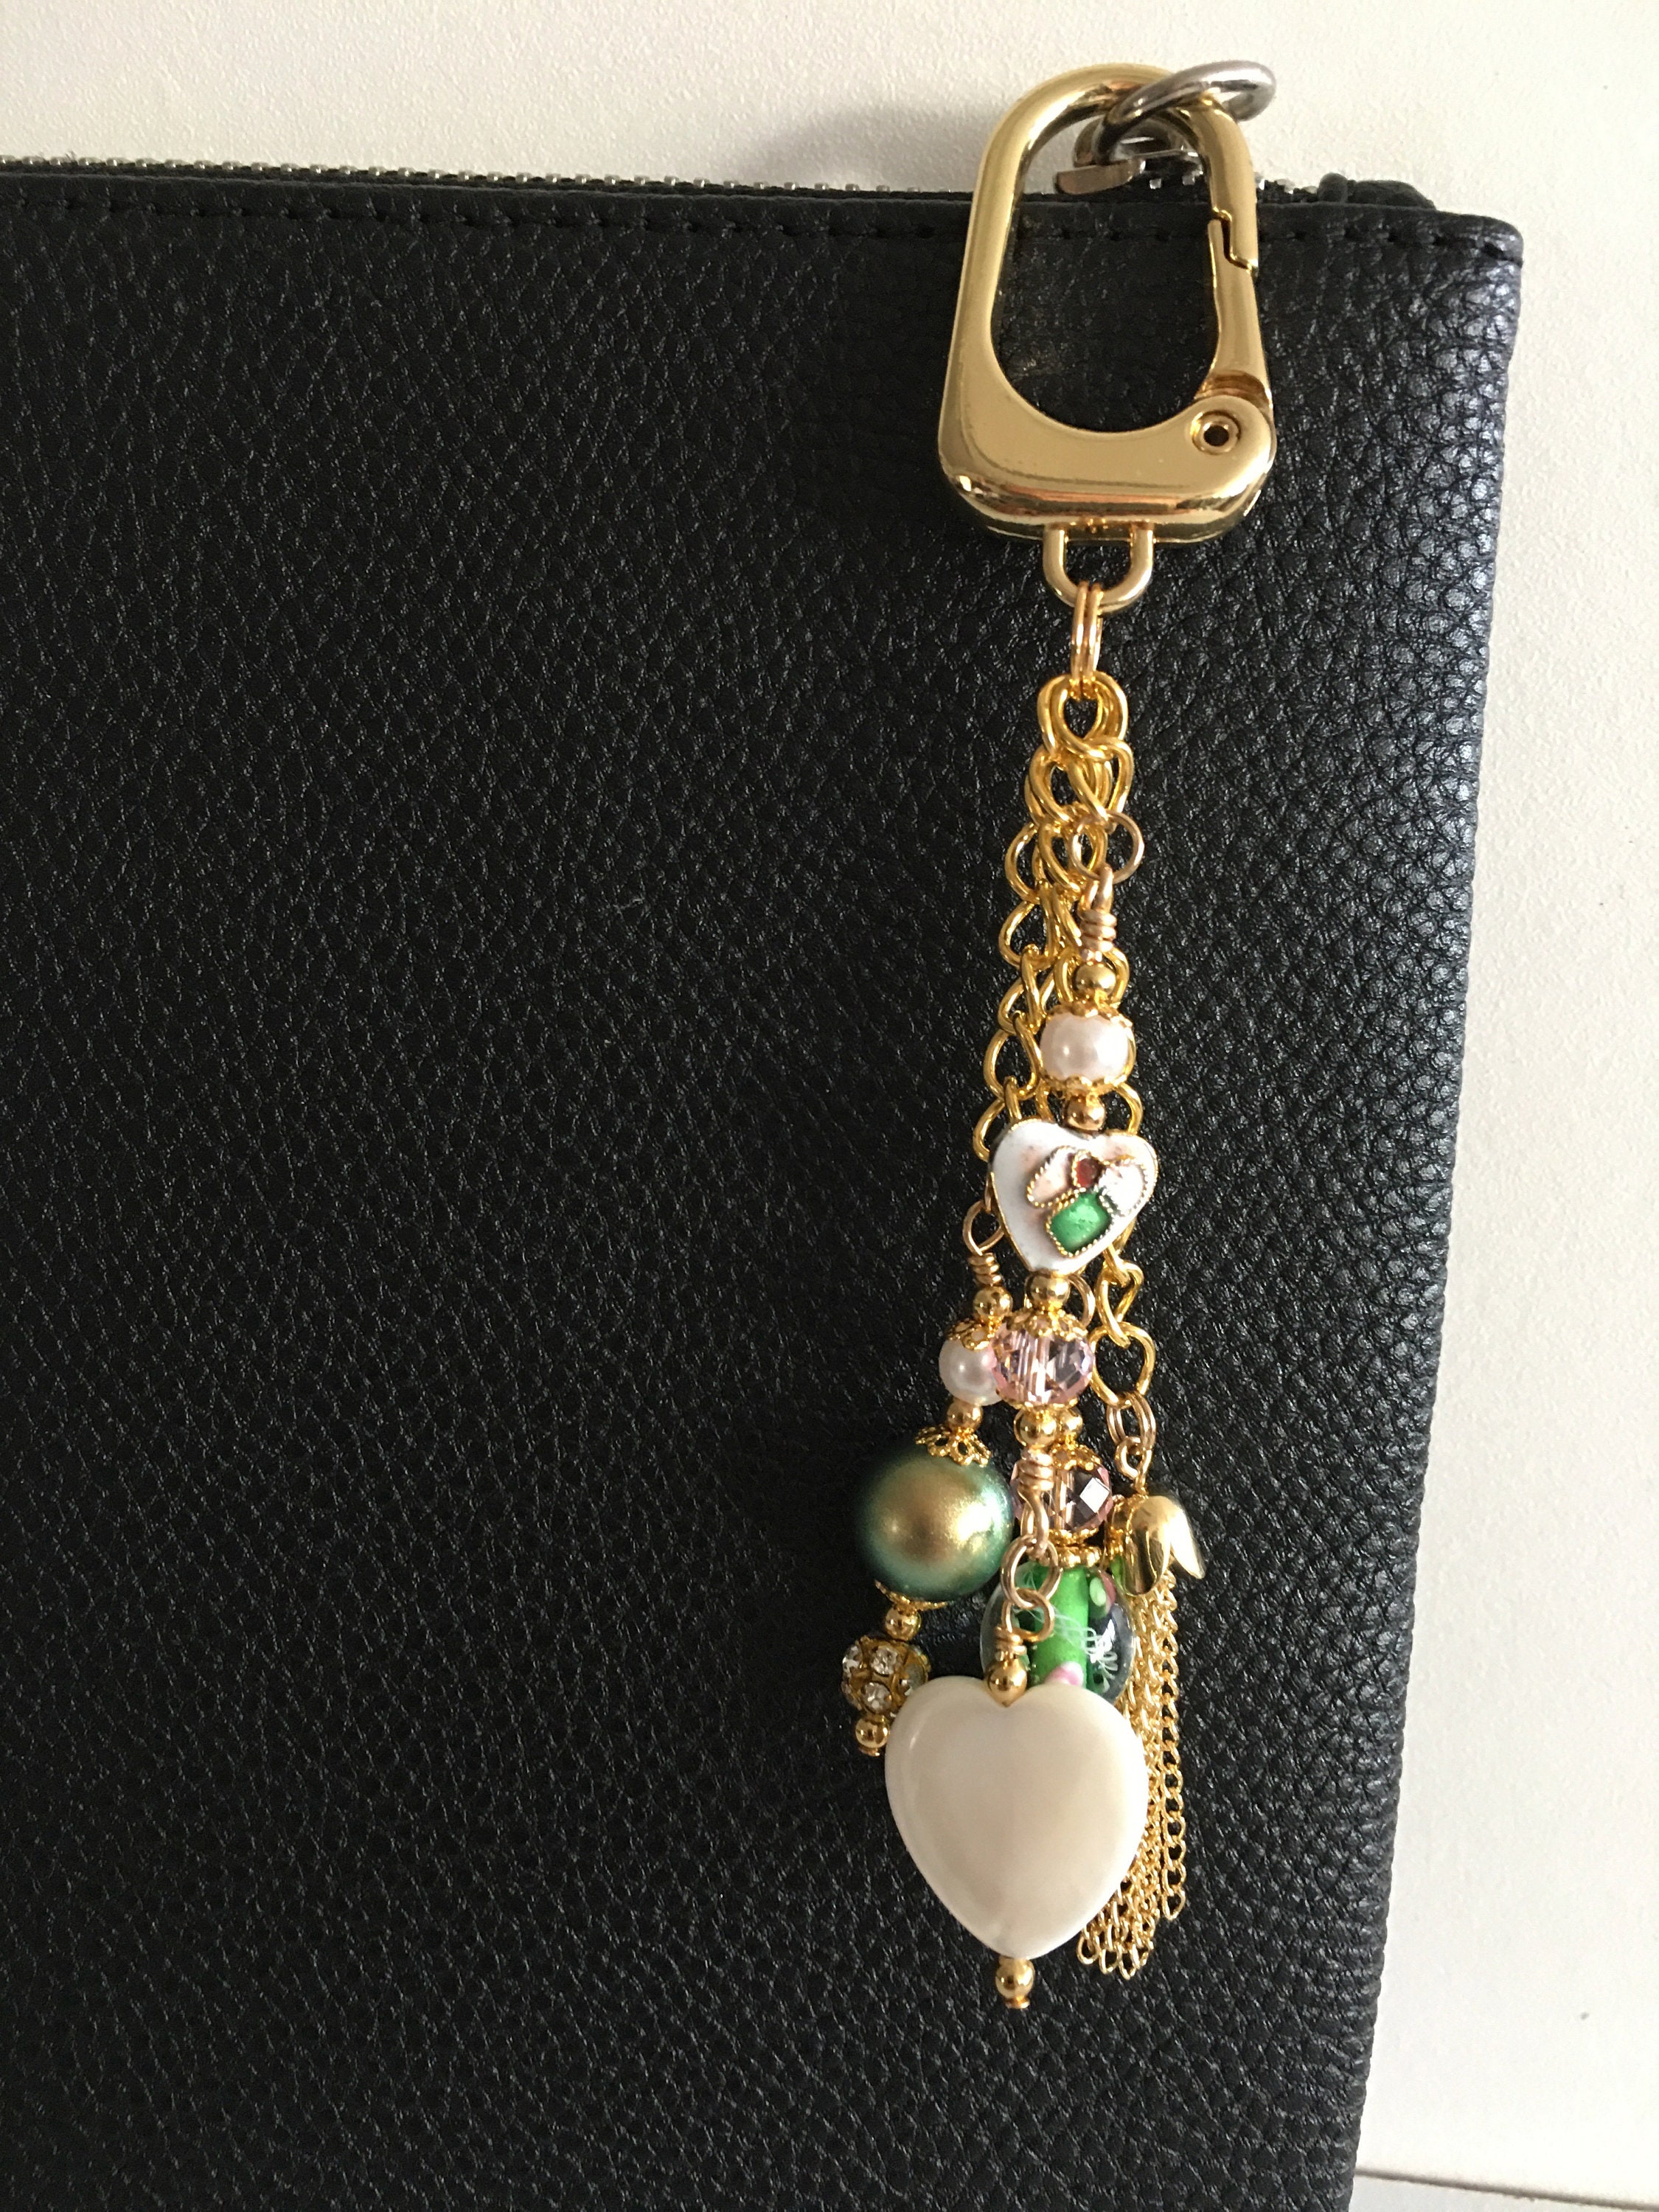 Gold Chain Handbag Purse Charm/keychain in Greens Pinks and - Etsy